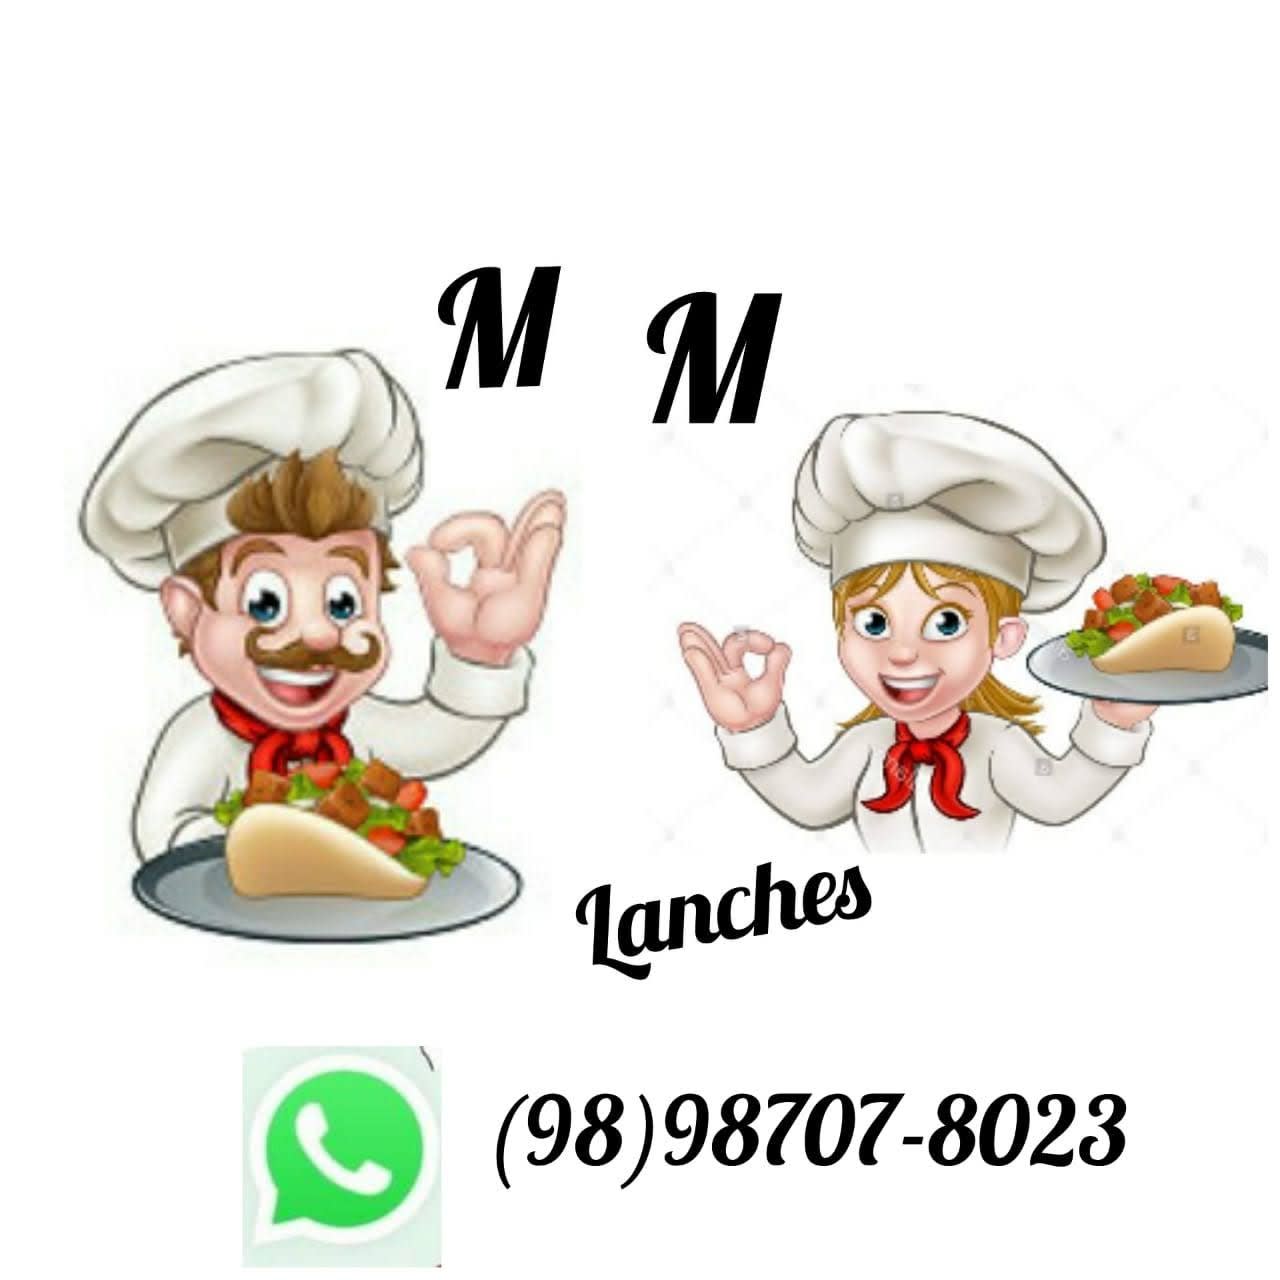 Mm Lanches e Delivery